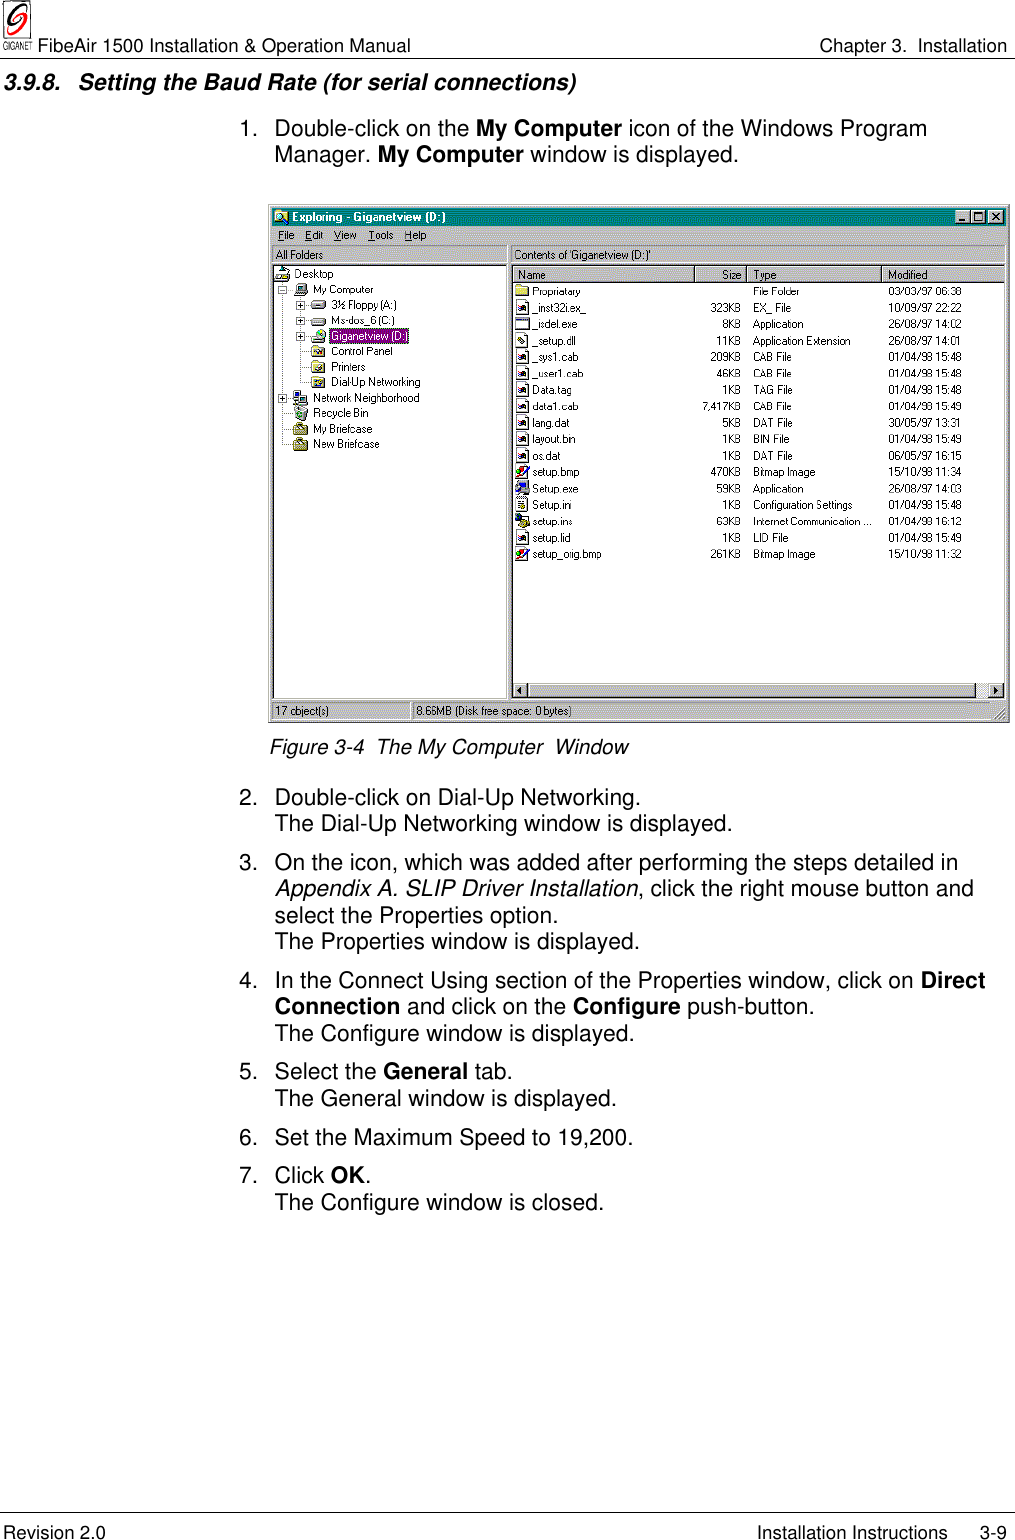  FibeAir 1500 Installation &amp; Operation Manual Chapter 3.  InstallationRevision 2.0 Installation Instructions 3-93.9.8.  Setting the Baud Rate (for serial connections)1. Double-click on the My Computer icon of the Windows ProgramManager. My Computer window is displayed.Figure 3-4  The My Computer  Window2. Double-click on Dial-Up Networking.The Dial-Up Networking window is displayed.3. On the icon, which was added after performing the steps detailed inAppendix A. SLIP Driver Installation, click the right mouse button andselect the Properties option.The Properties window is displayed.4. In the Connect Using section of the Properties window, click on DirectConnection and click on the Configure push-button.The Configure window is displayed.5. Select the General tab.The General window is displayed.6. Set the Maximum Speed to 19,200.7. Click OK.The Configure window is closed.